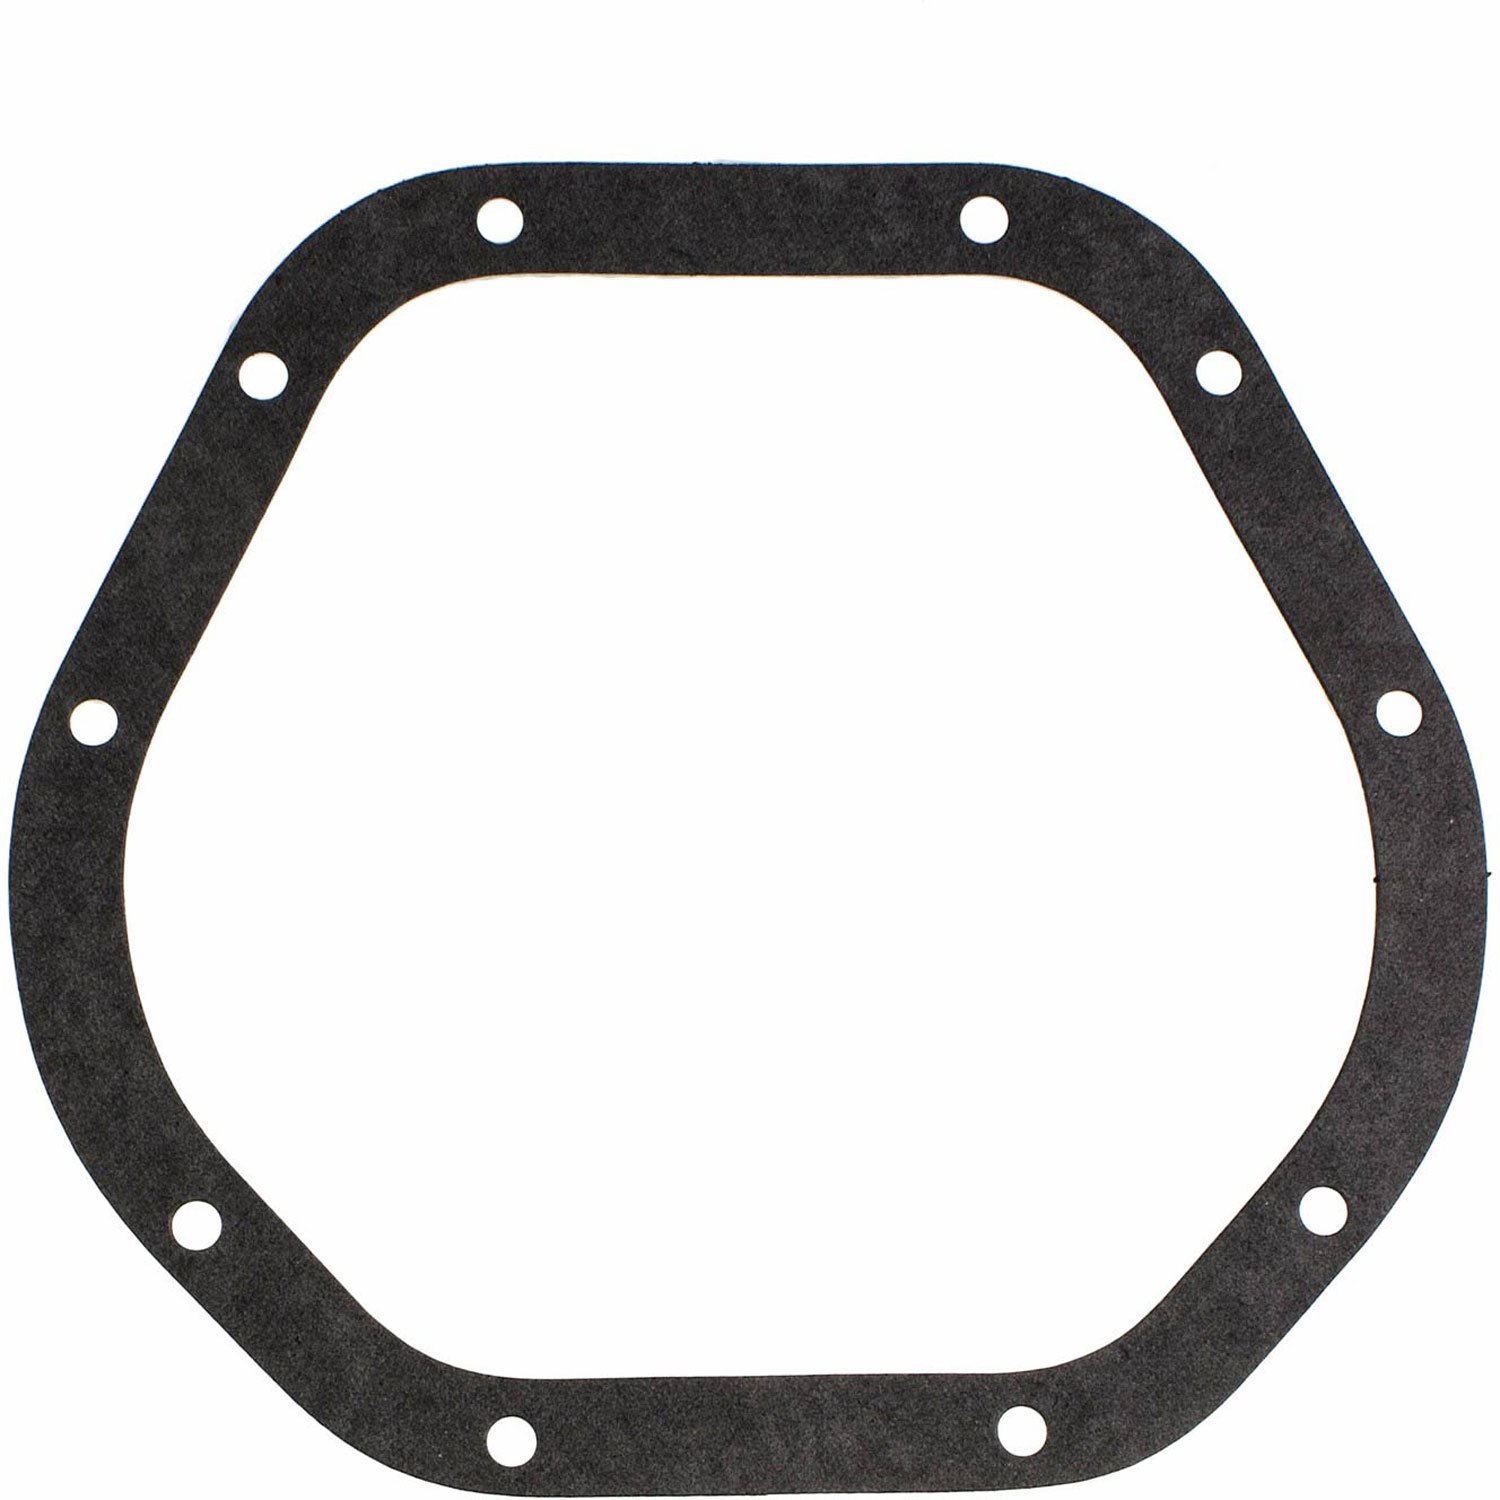 Differential Cover Gasket for Dana 44 Differentials